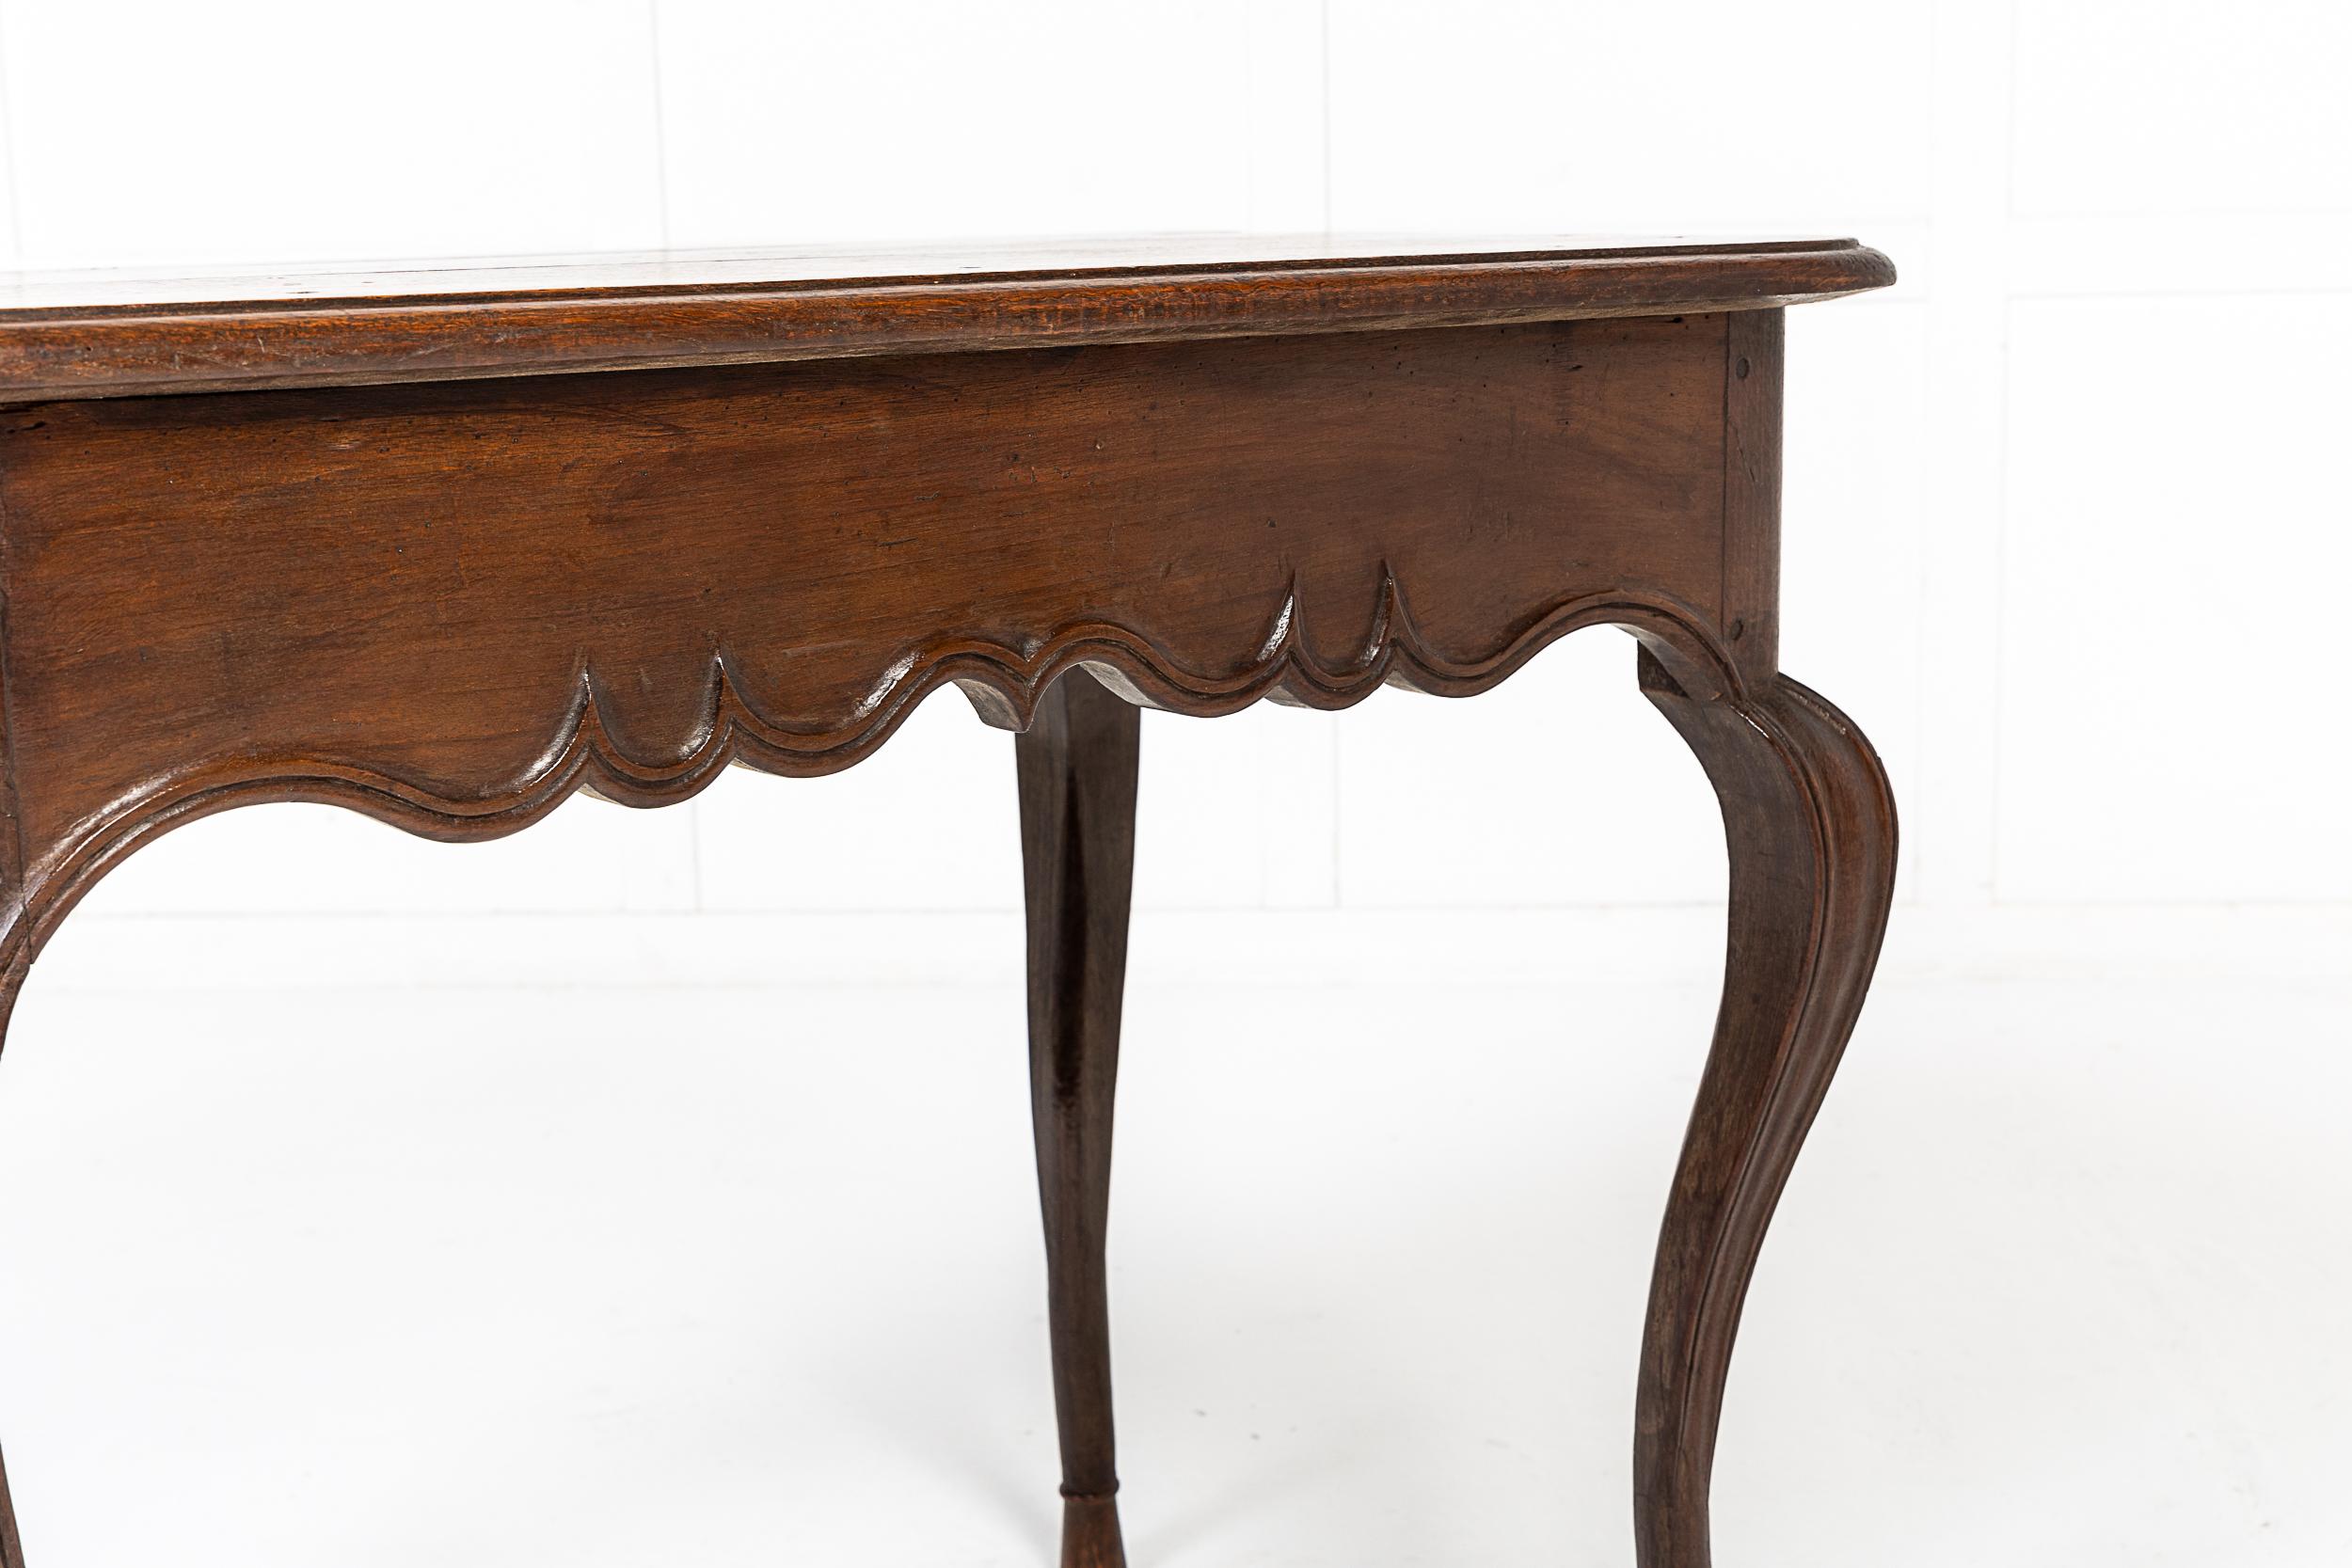 A Fine Mid-18th Century French Louis XV Period Oak Side or Occasional Table with Panelled and Moulded Detailing.

This charming table dates to the middle of the 18th century and is of excellent colour. The three plank top features a simple edge